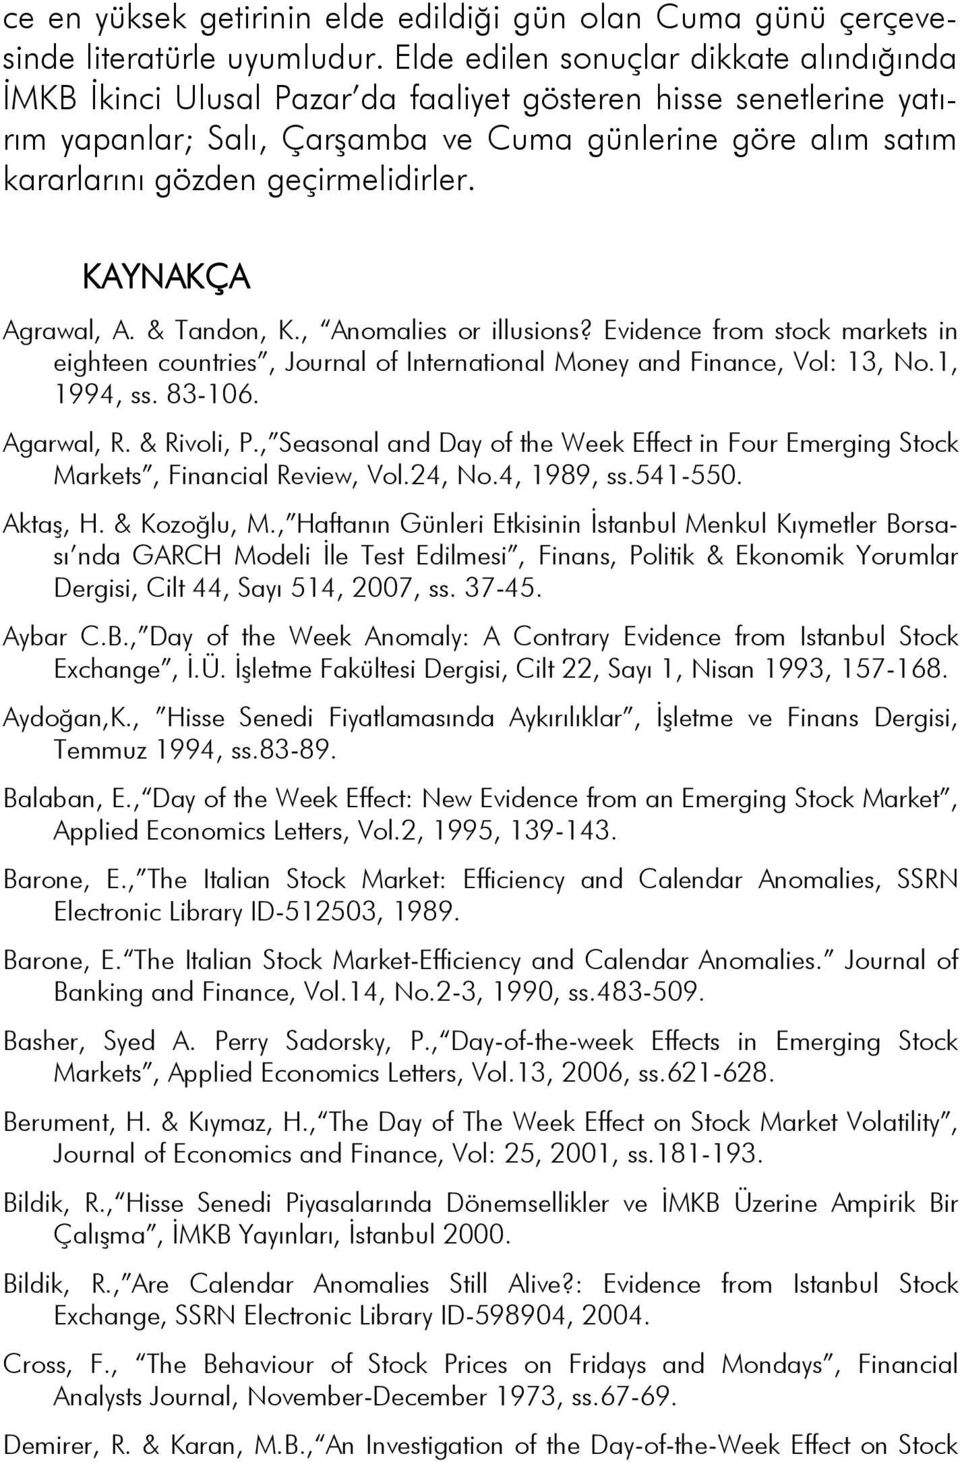 geçirmelidirler. KAYNAKÇA Agrawal, A. & Tandon, K., Anomalies or illusions? Evidence from stock markets in eighteen countries, Journal of International Money and Finance, Vol: 13, No.1, 1994, ss.